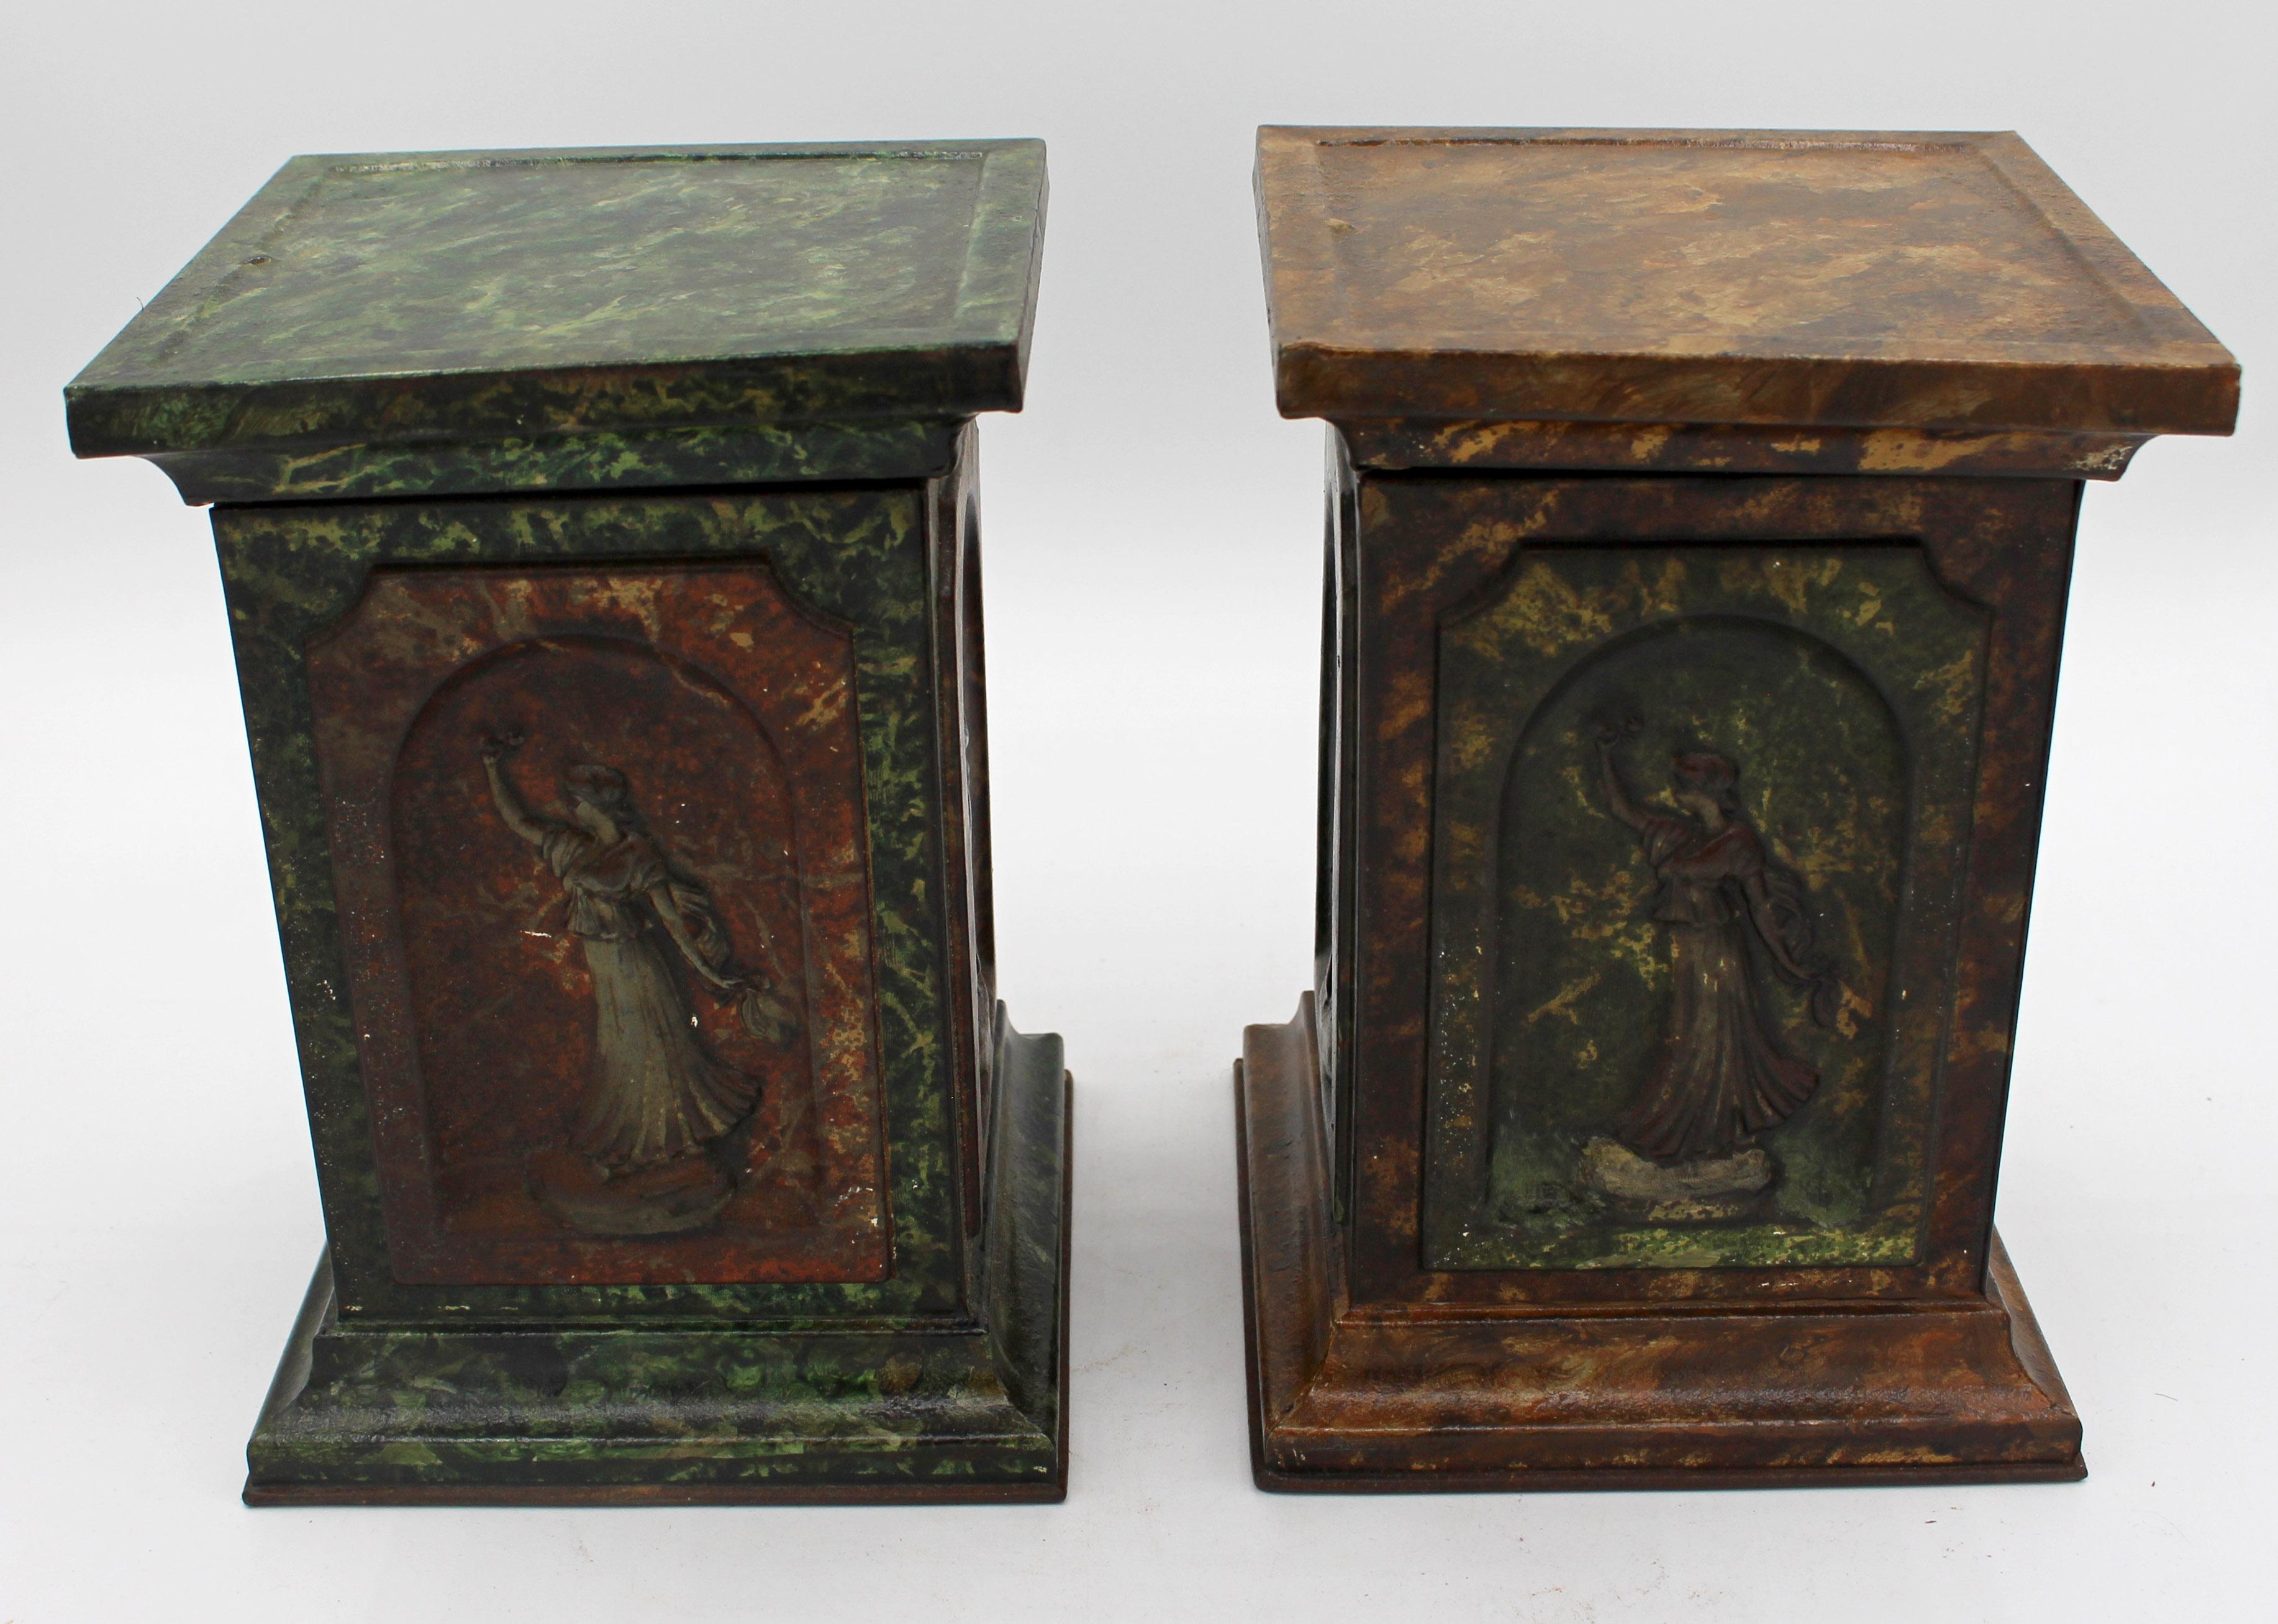 Pair of Huntley & Palmers sculpture pedestal form biscuit tin boxes, circa 1909. A contrasting pair - each niche with a Classical female figure. Good condition.
5